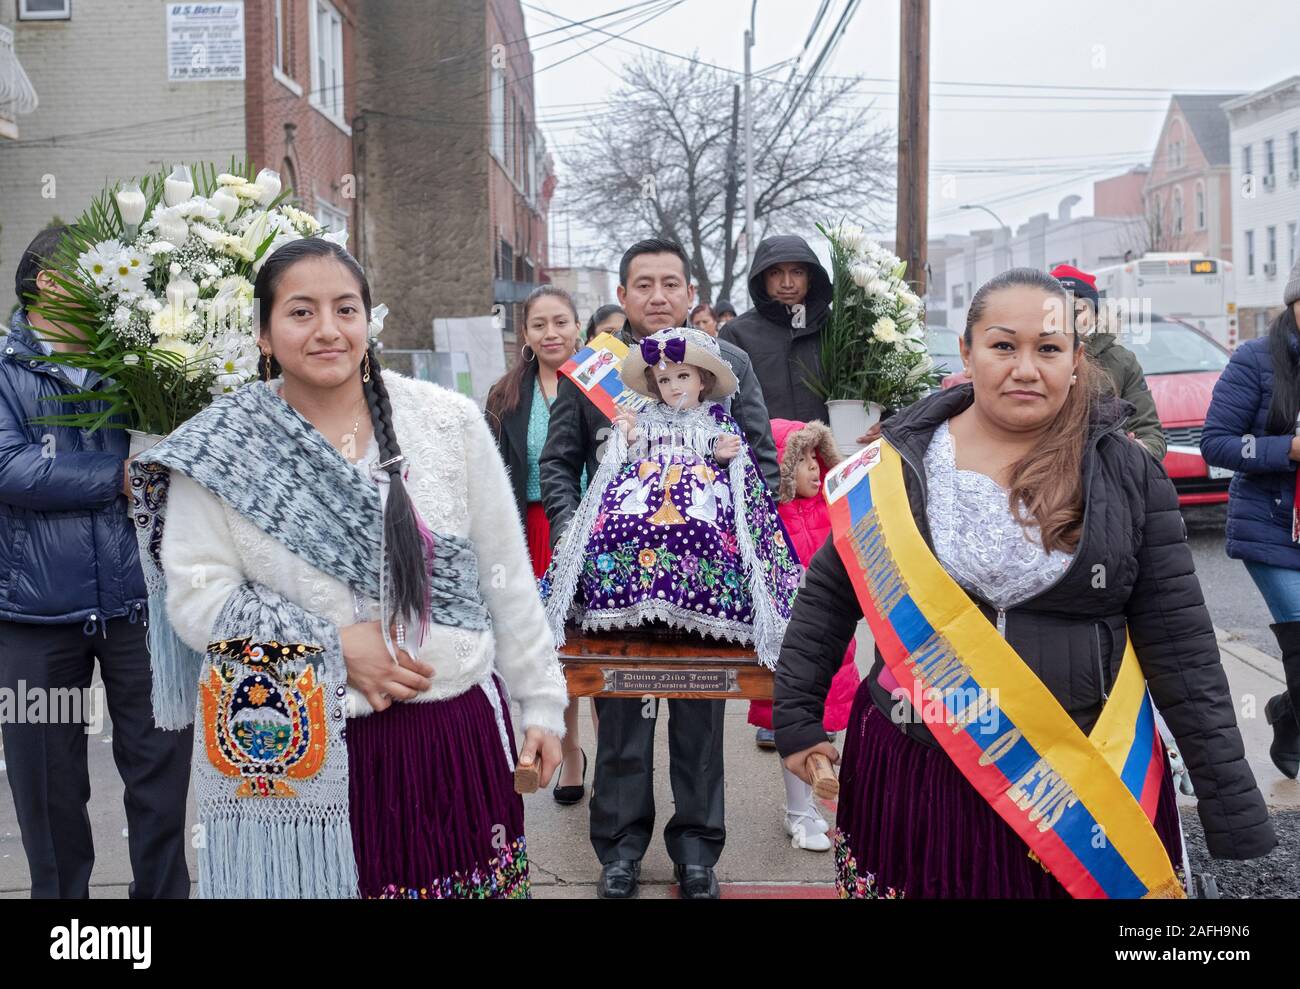 Ecuadorian Americans Catholics in mid December march with statues of Baby Jesus to celebrate the birth of Christ. In Corona, Queens, New York City. Stock Photo